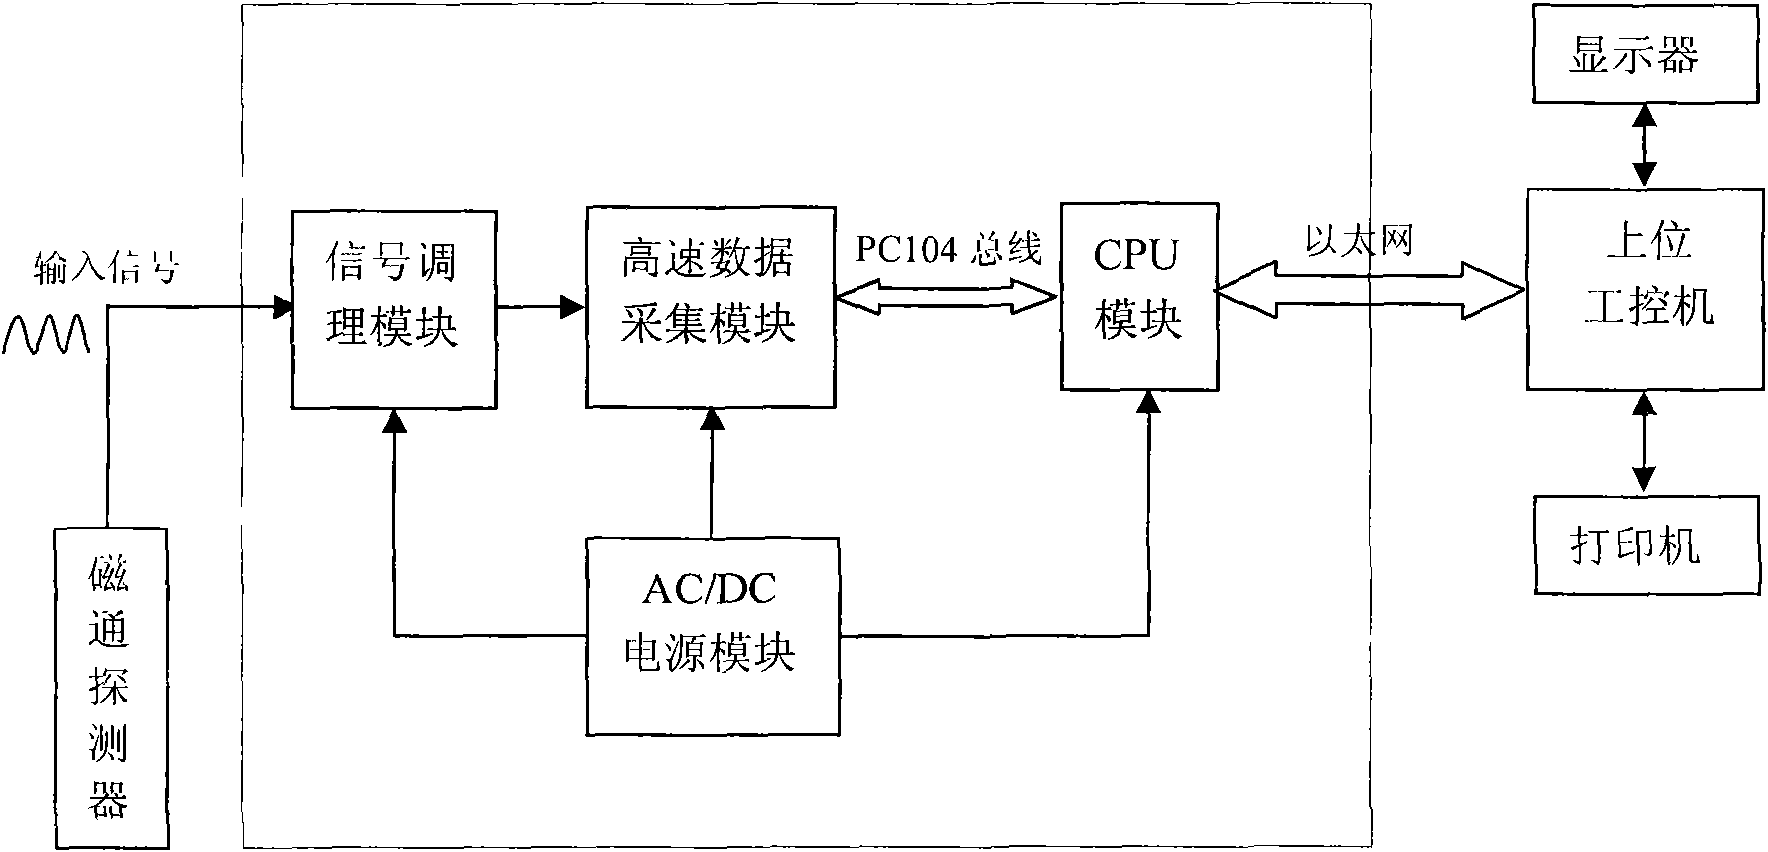 System for testing turn-to-turn short circuit of rotor winding of automobile turbine generator